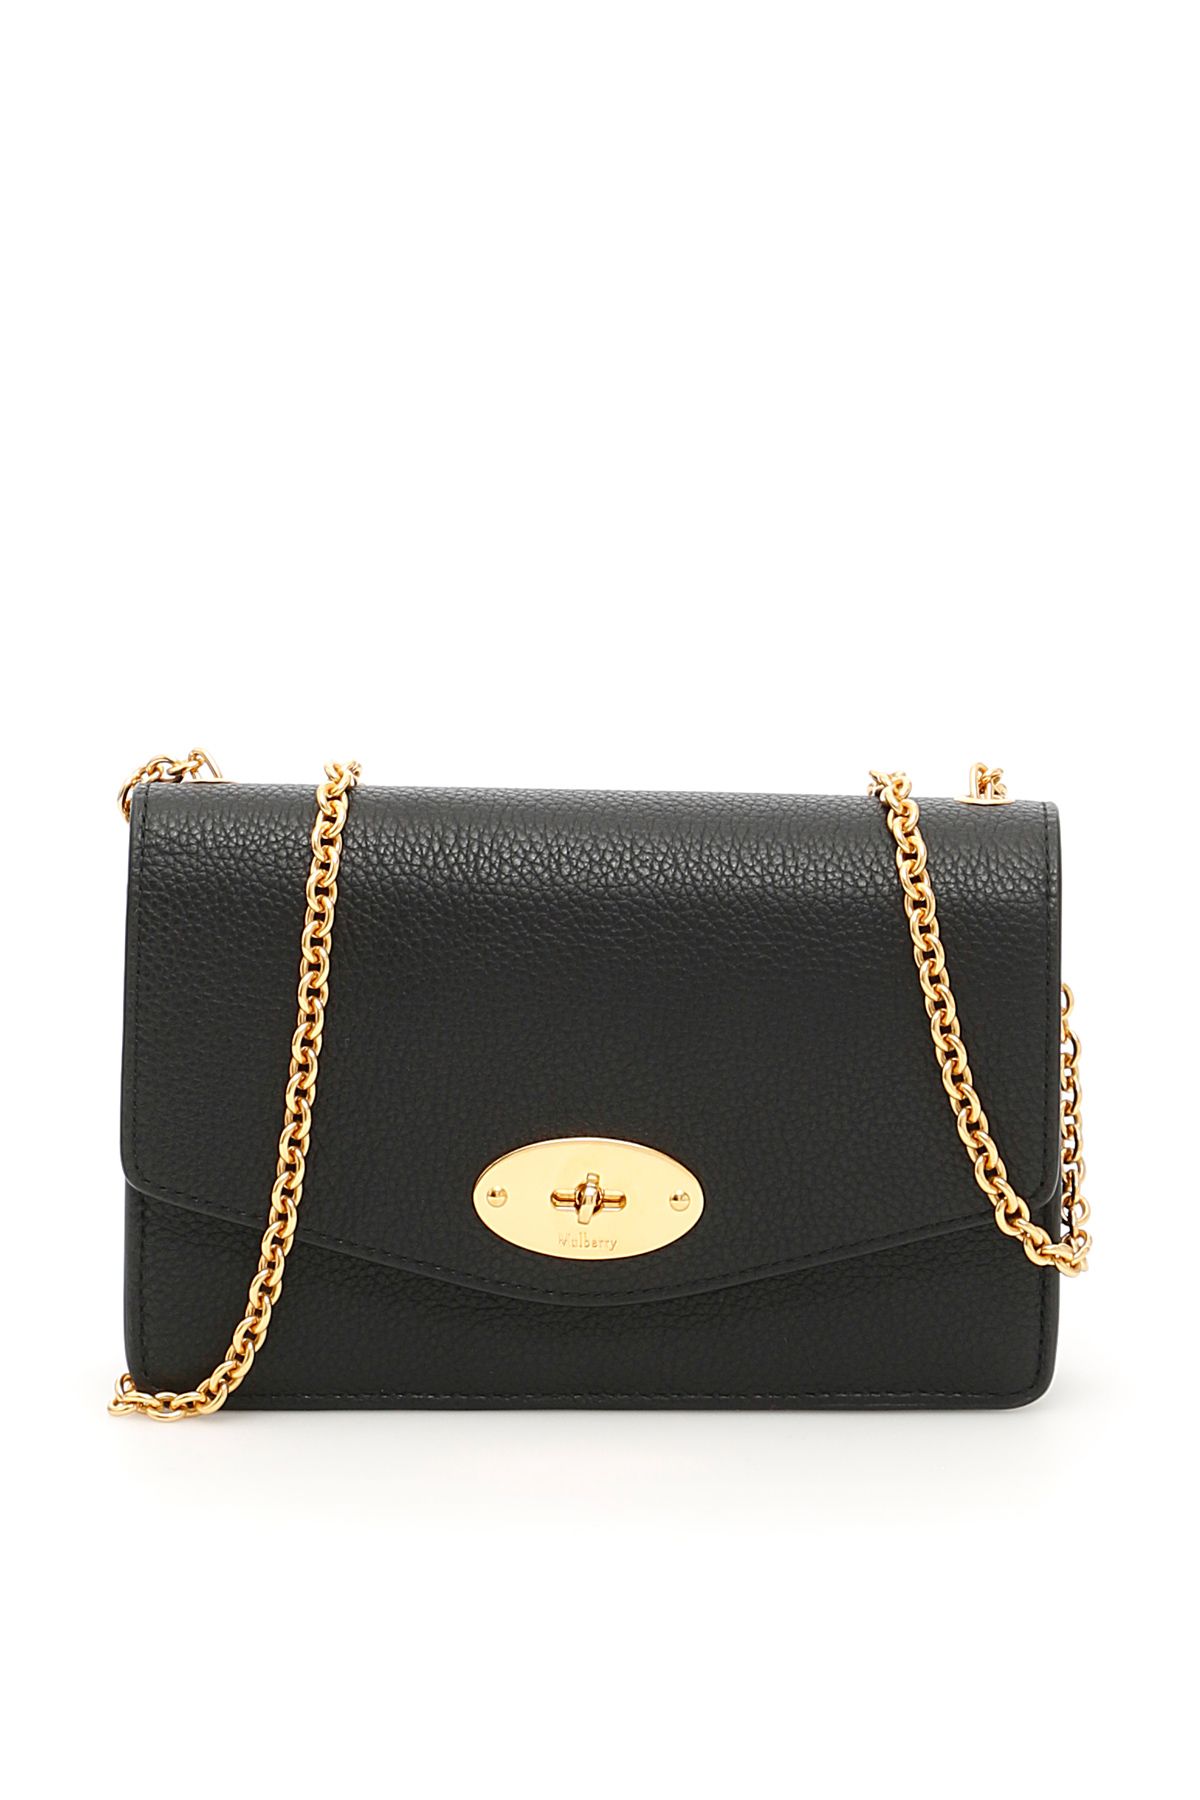 Mulberry MULBERRY small darley bag